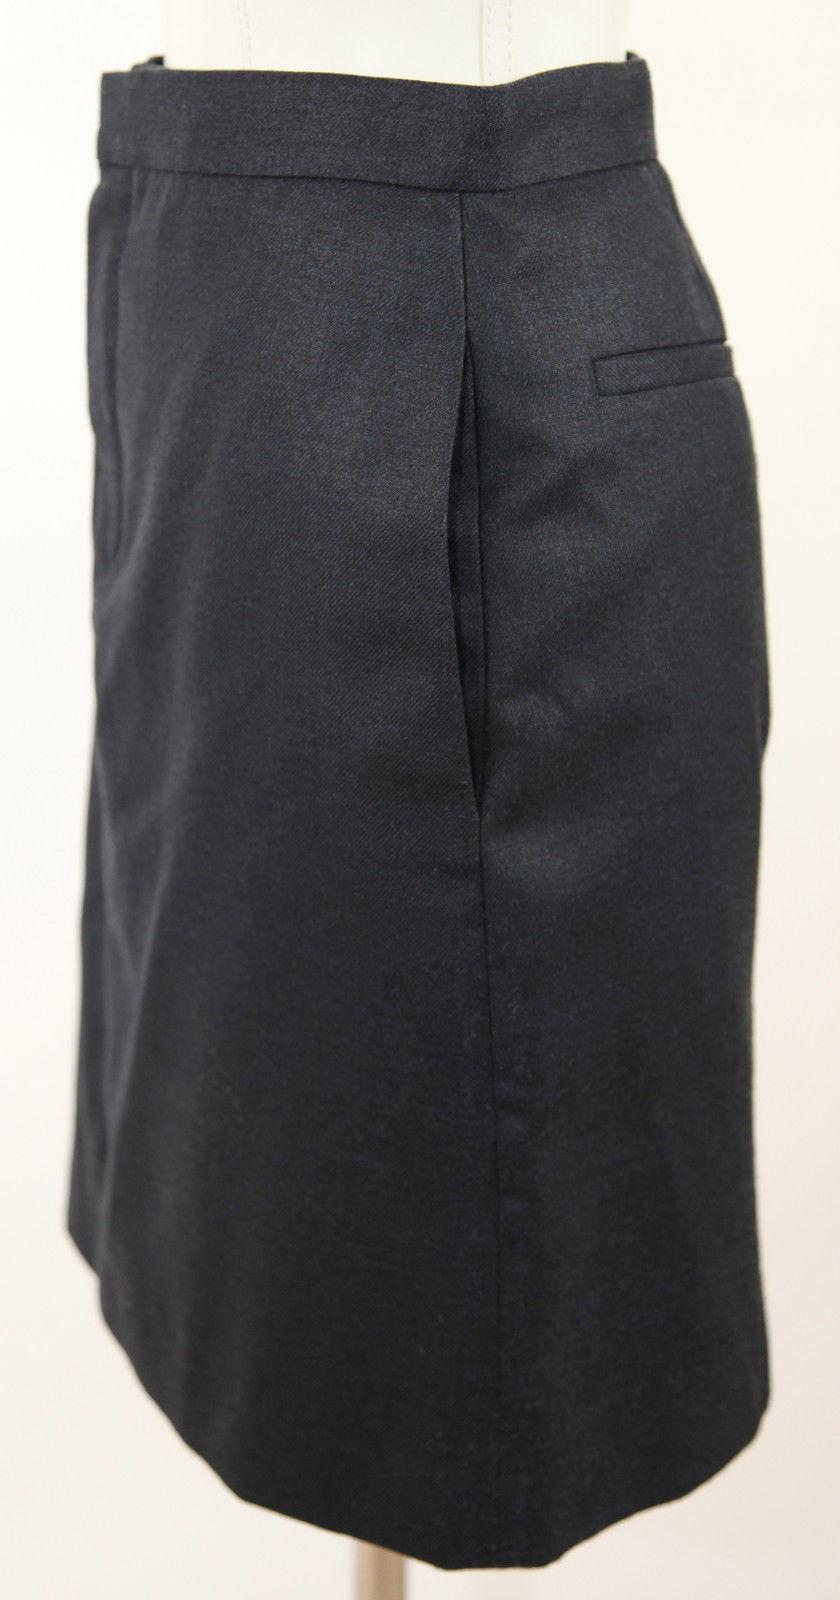 CHLOE Skirt Dress Black Silk Wool Straight Clothing Sz 36 In Excellent Condition For Sale In Hollywood, FL